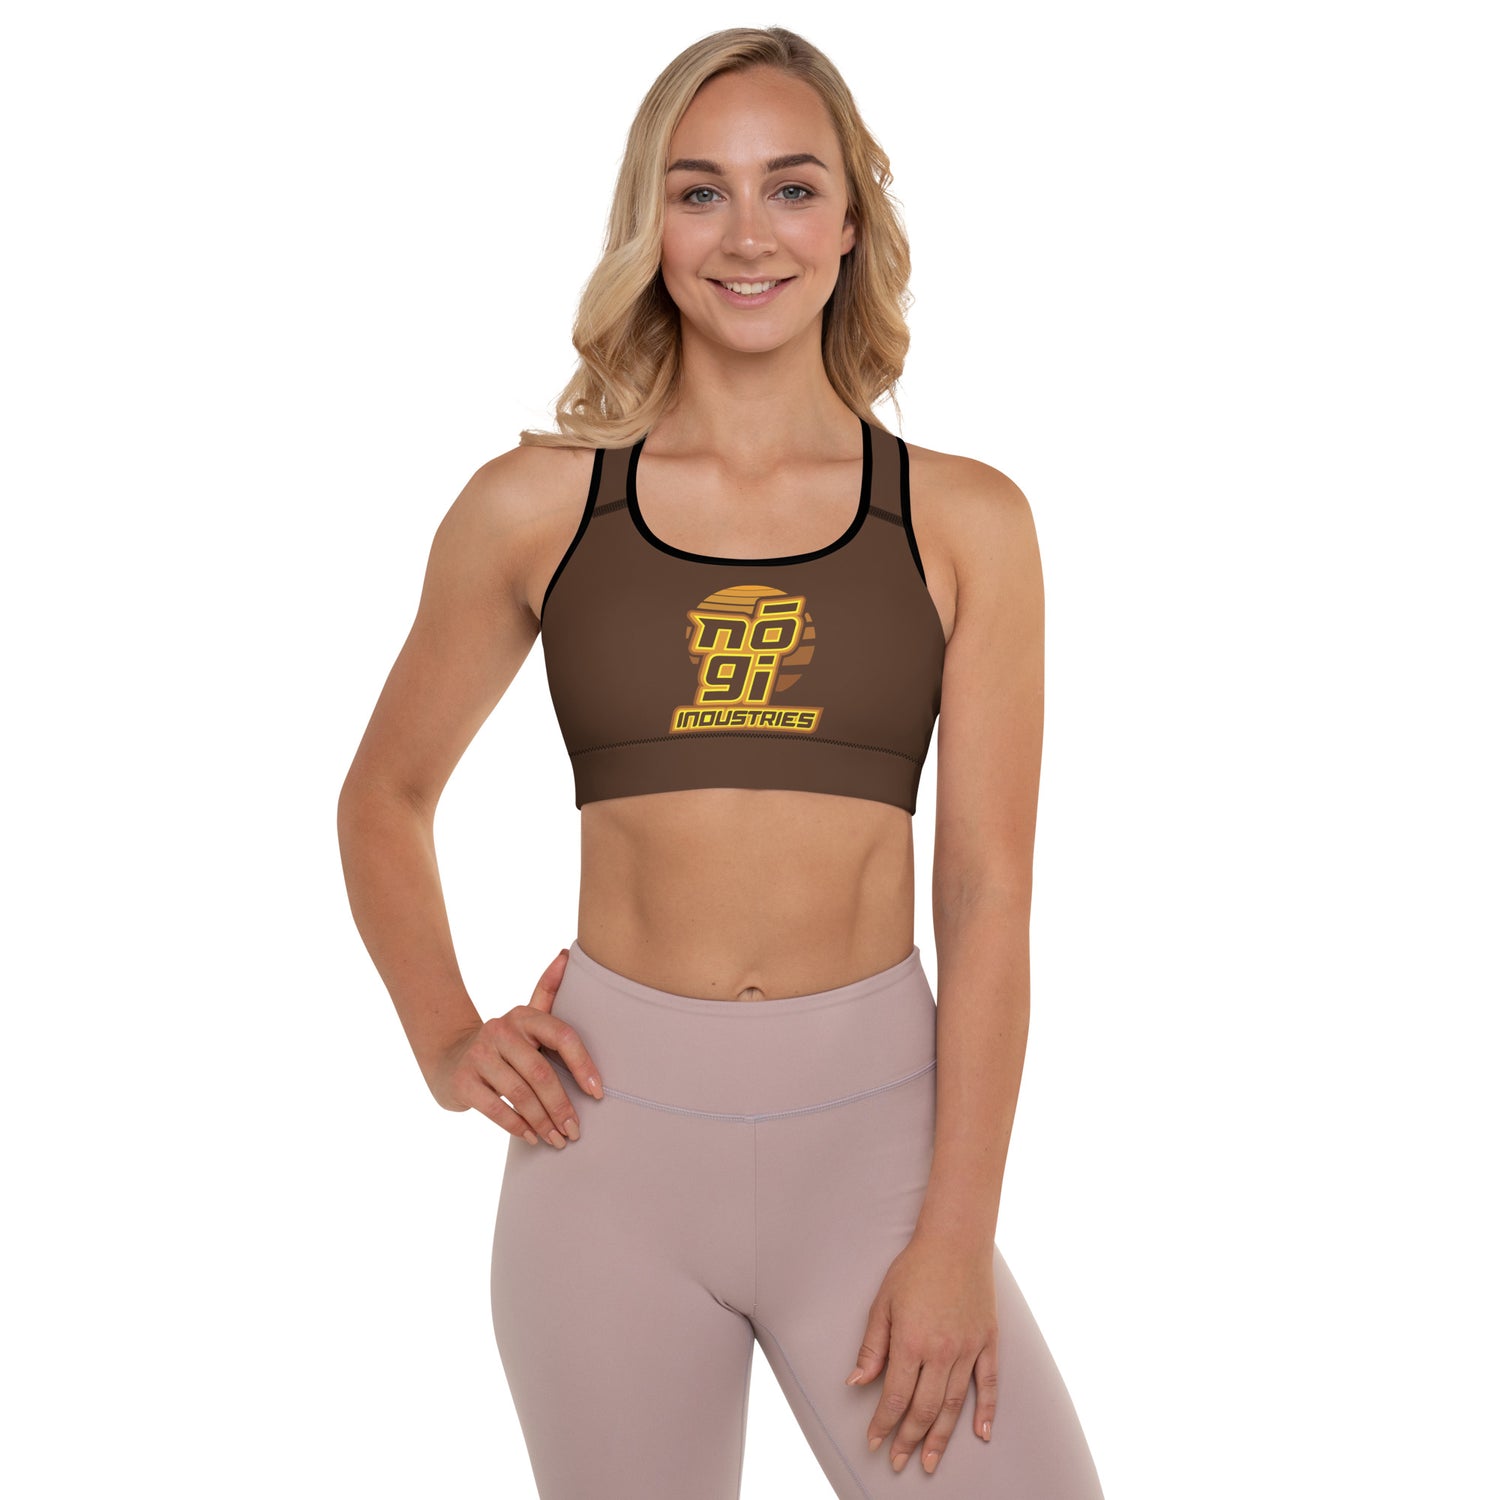 7Four BROWN Padded Sports Bra by Nogi Industries